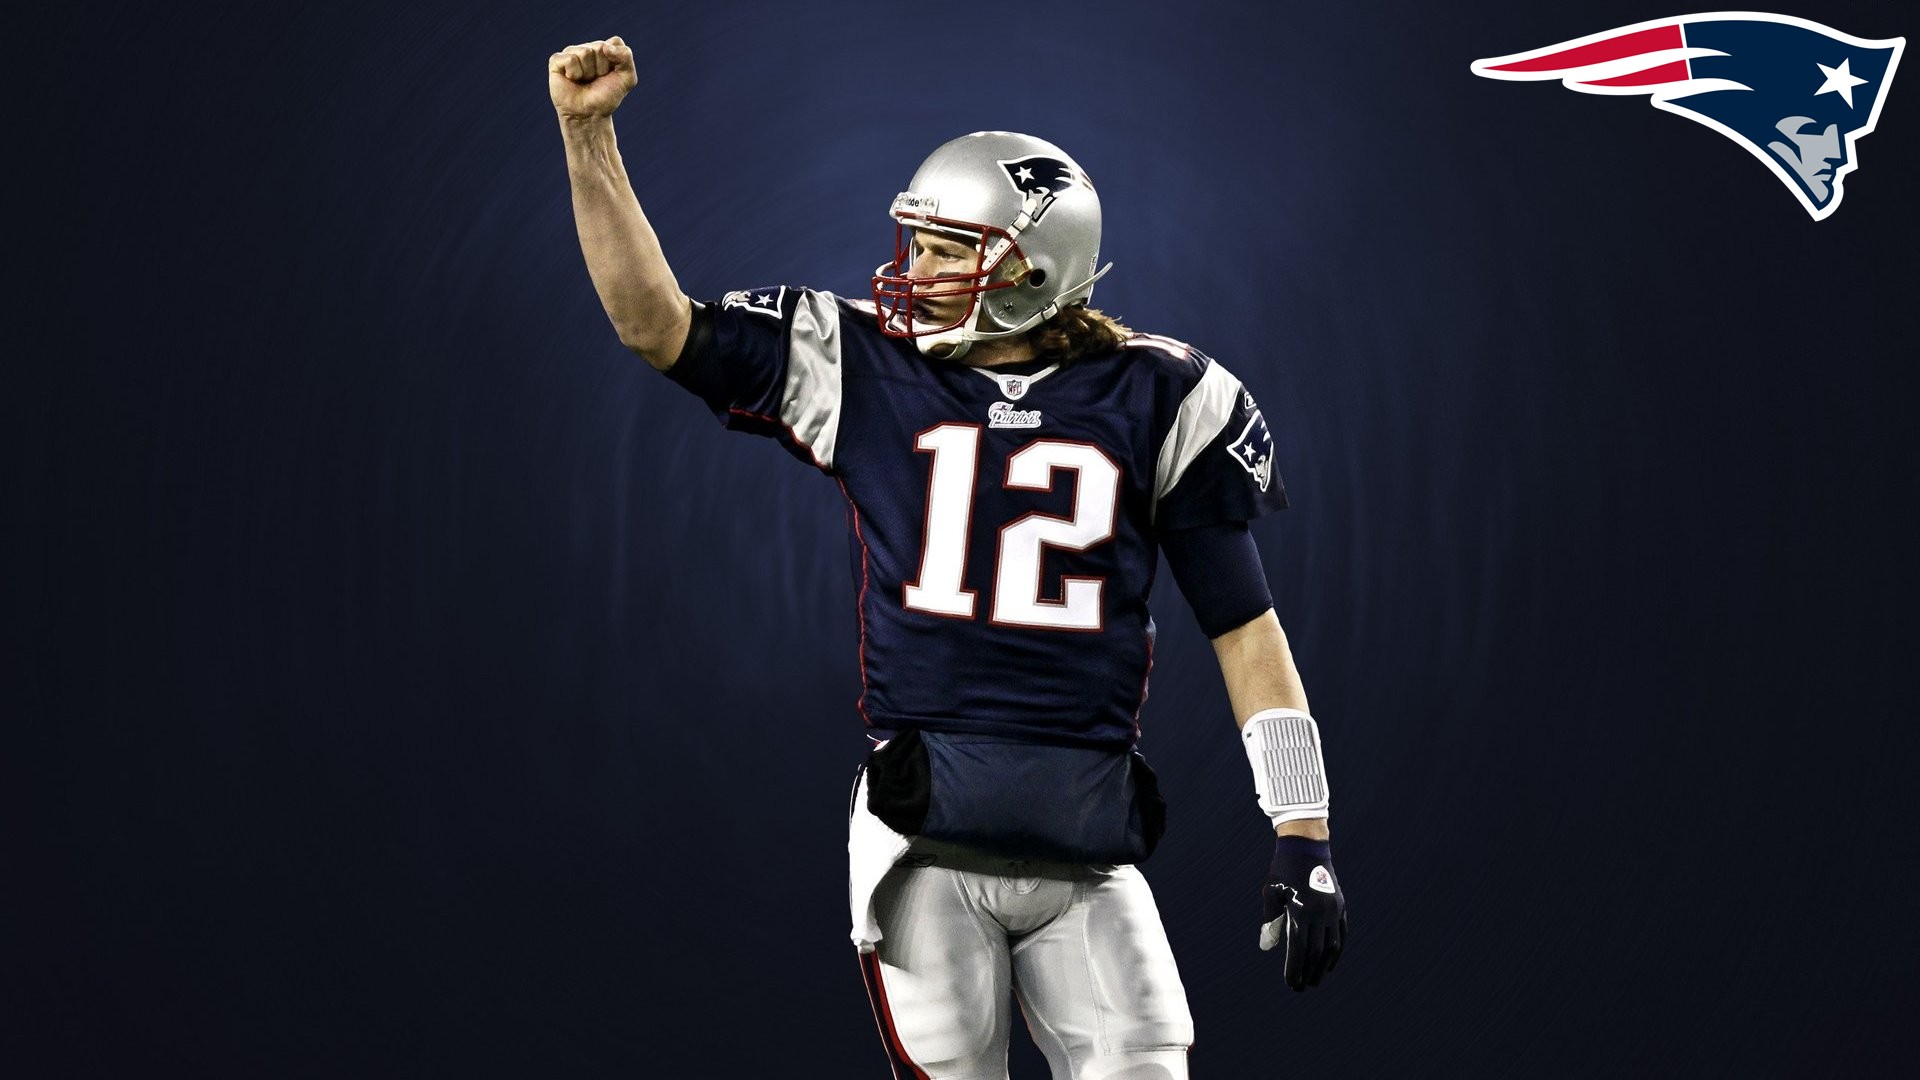 Tom Brady HD Wallpapers With Resolution 1920X1080 pixel. You can make this wallpaper for your Mac or Windows Desktop Background, iPhone, Android or Tablet and another Smartphone device for free